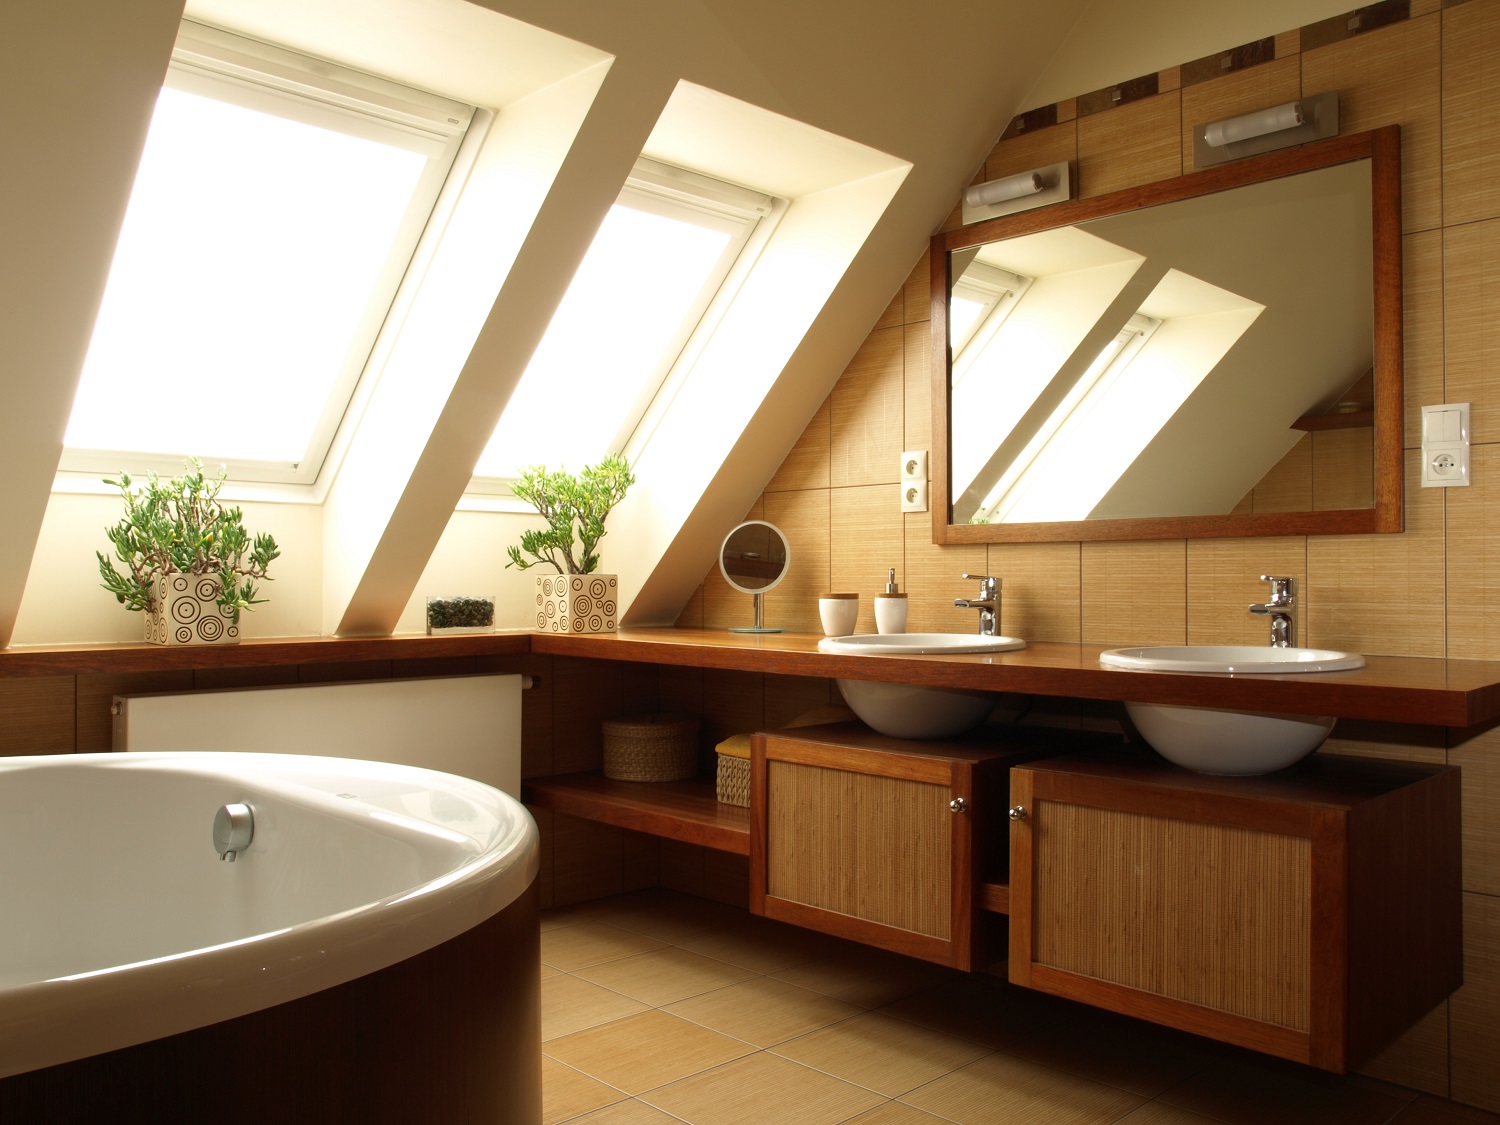 Lifestyle image of an attic bathroom, with tiled floor and walls, wooden wall mounted cabinets and countertop, freestanding bath and skylights